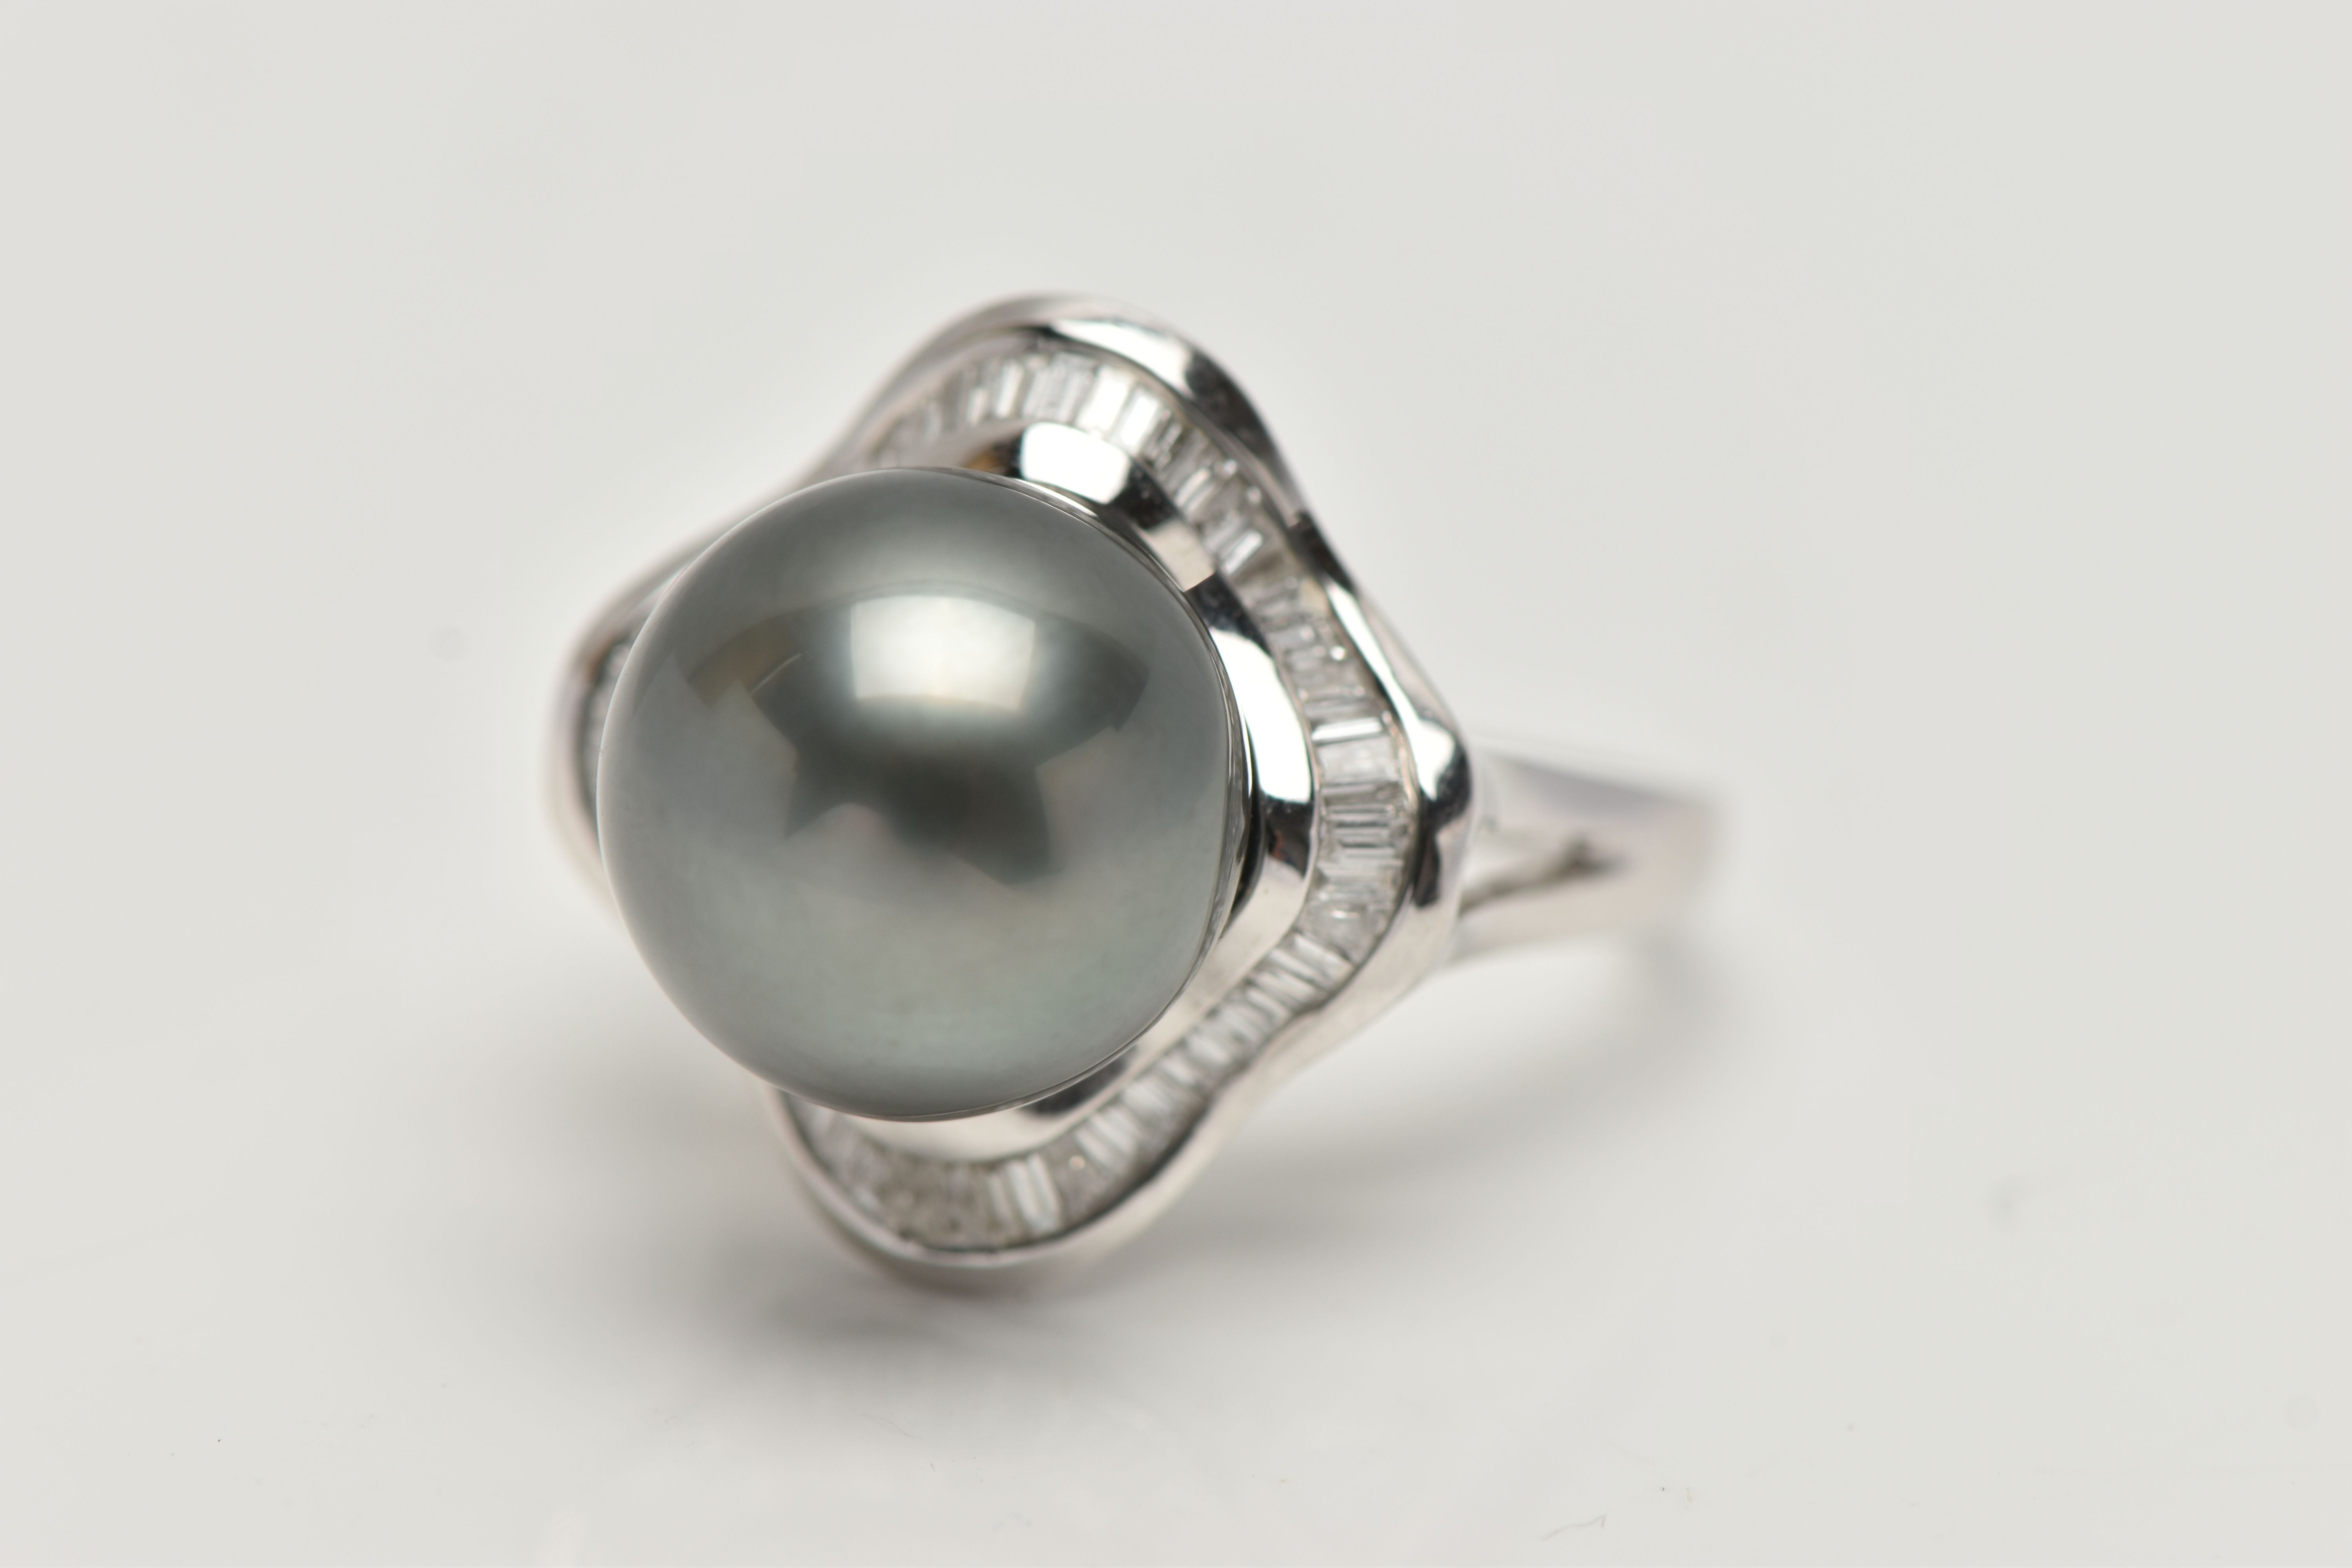 A WHITE METAL THAITIAN PEARL AND DIAMOND DRESS RING, large silver grey pearl, measuring